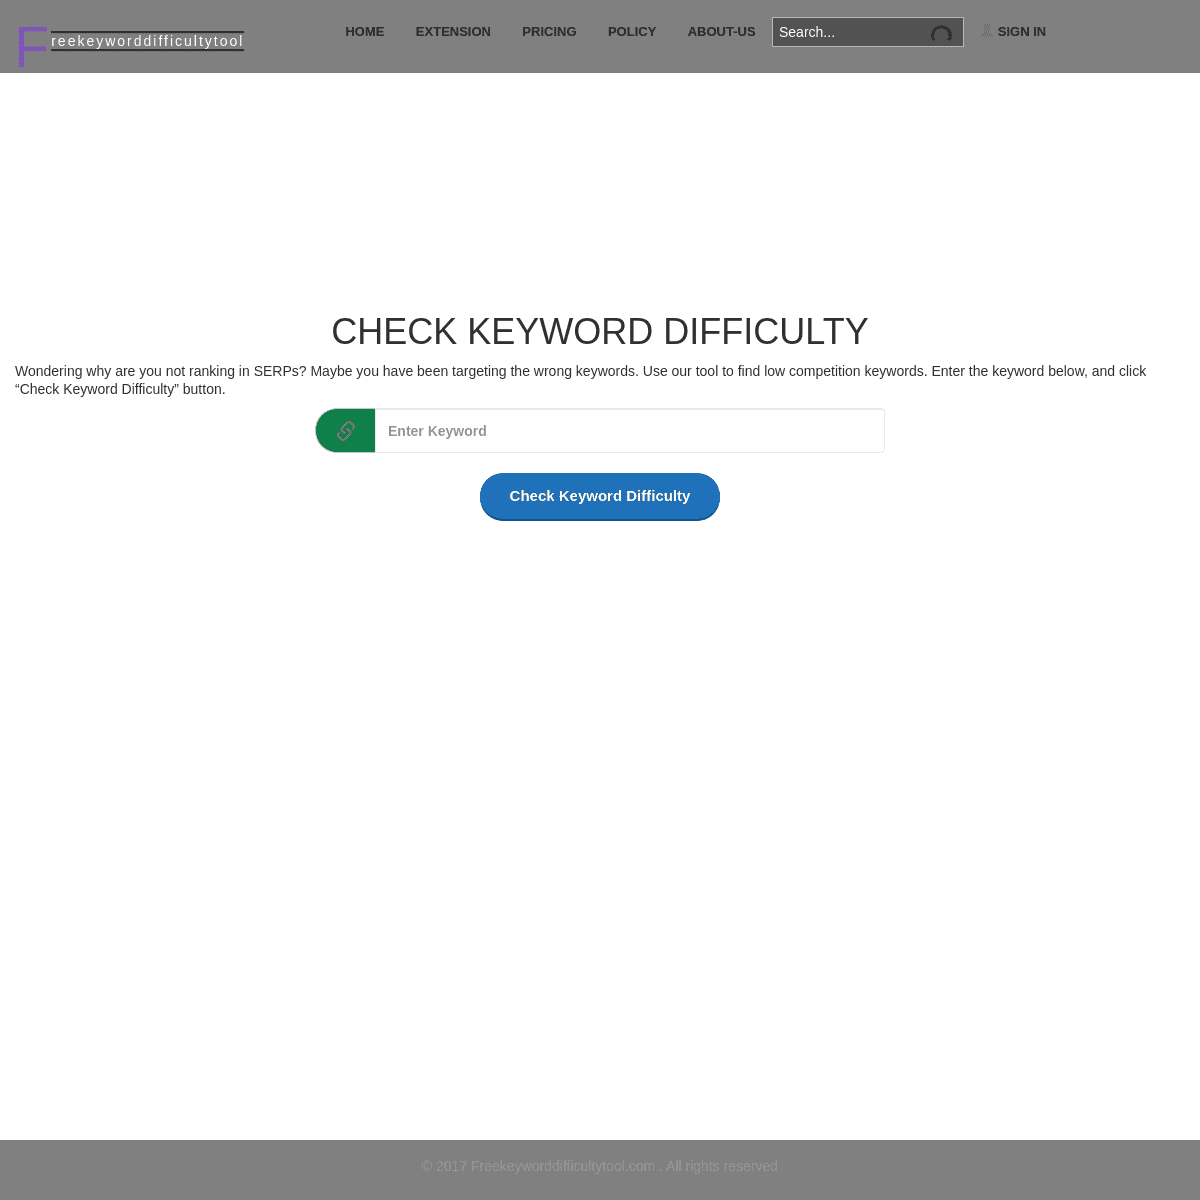 A complete backup of https://freekeyworddifficultytool.com